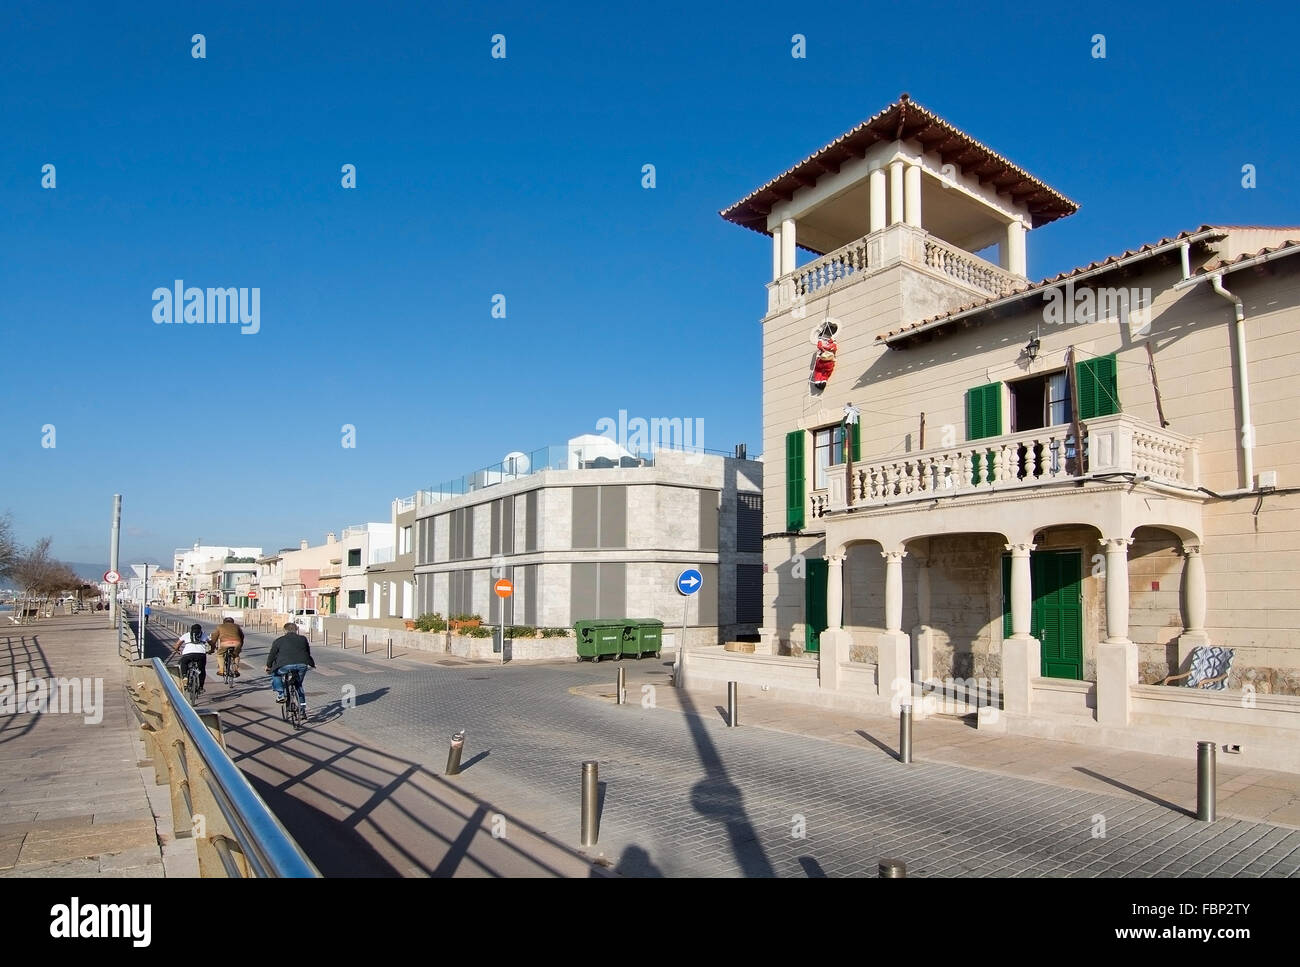 Building with Santa Claus hanging out from building and some bicyclists in Molinar, Palma de Mallorca, Spain. Stock Photo